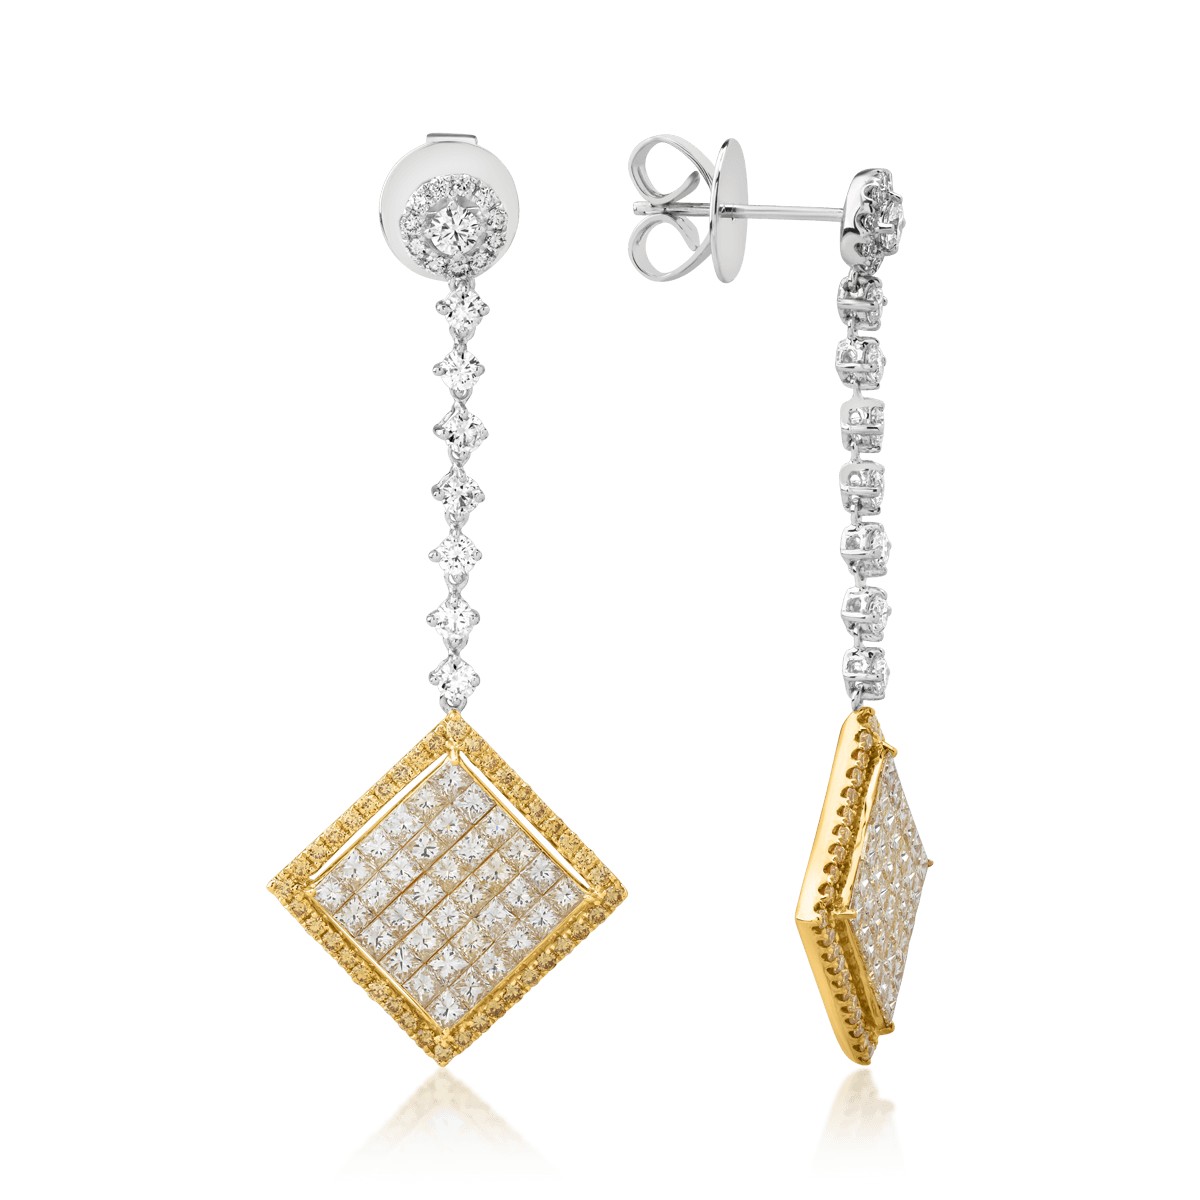 18k white gold earrings with white diamonds of 3.75CT and colorful diamonds of 0.63ct